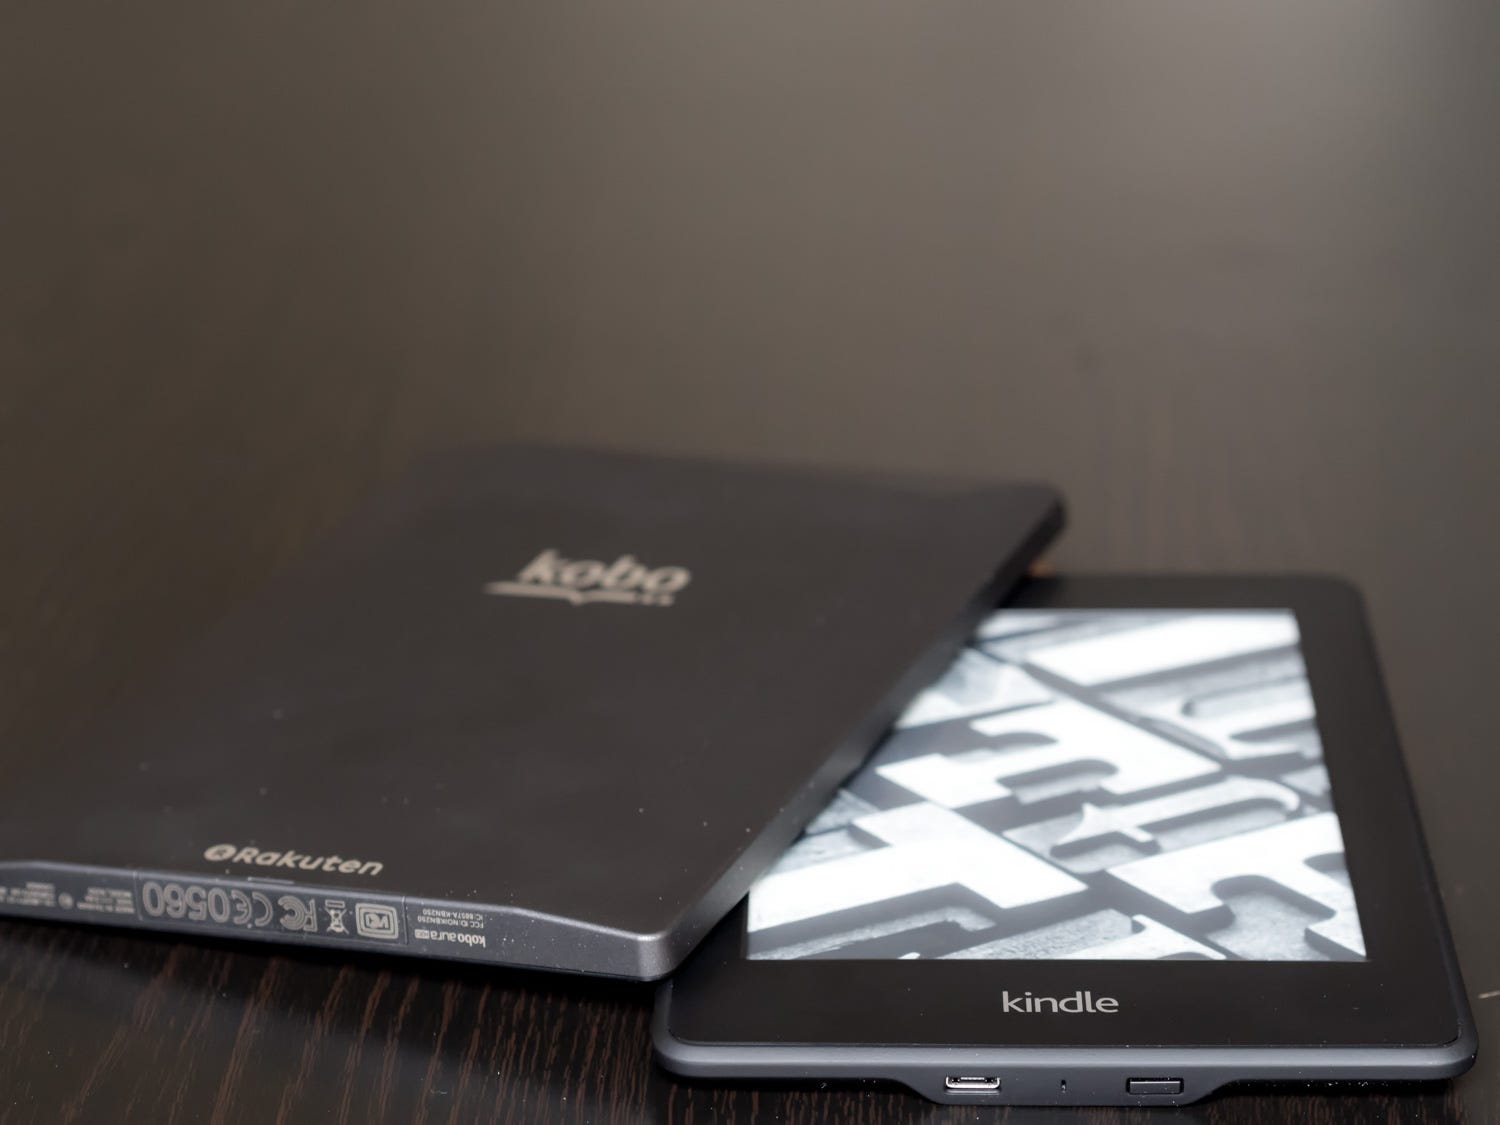 Kobo brings the Forma form factor to a cheaper model